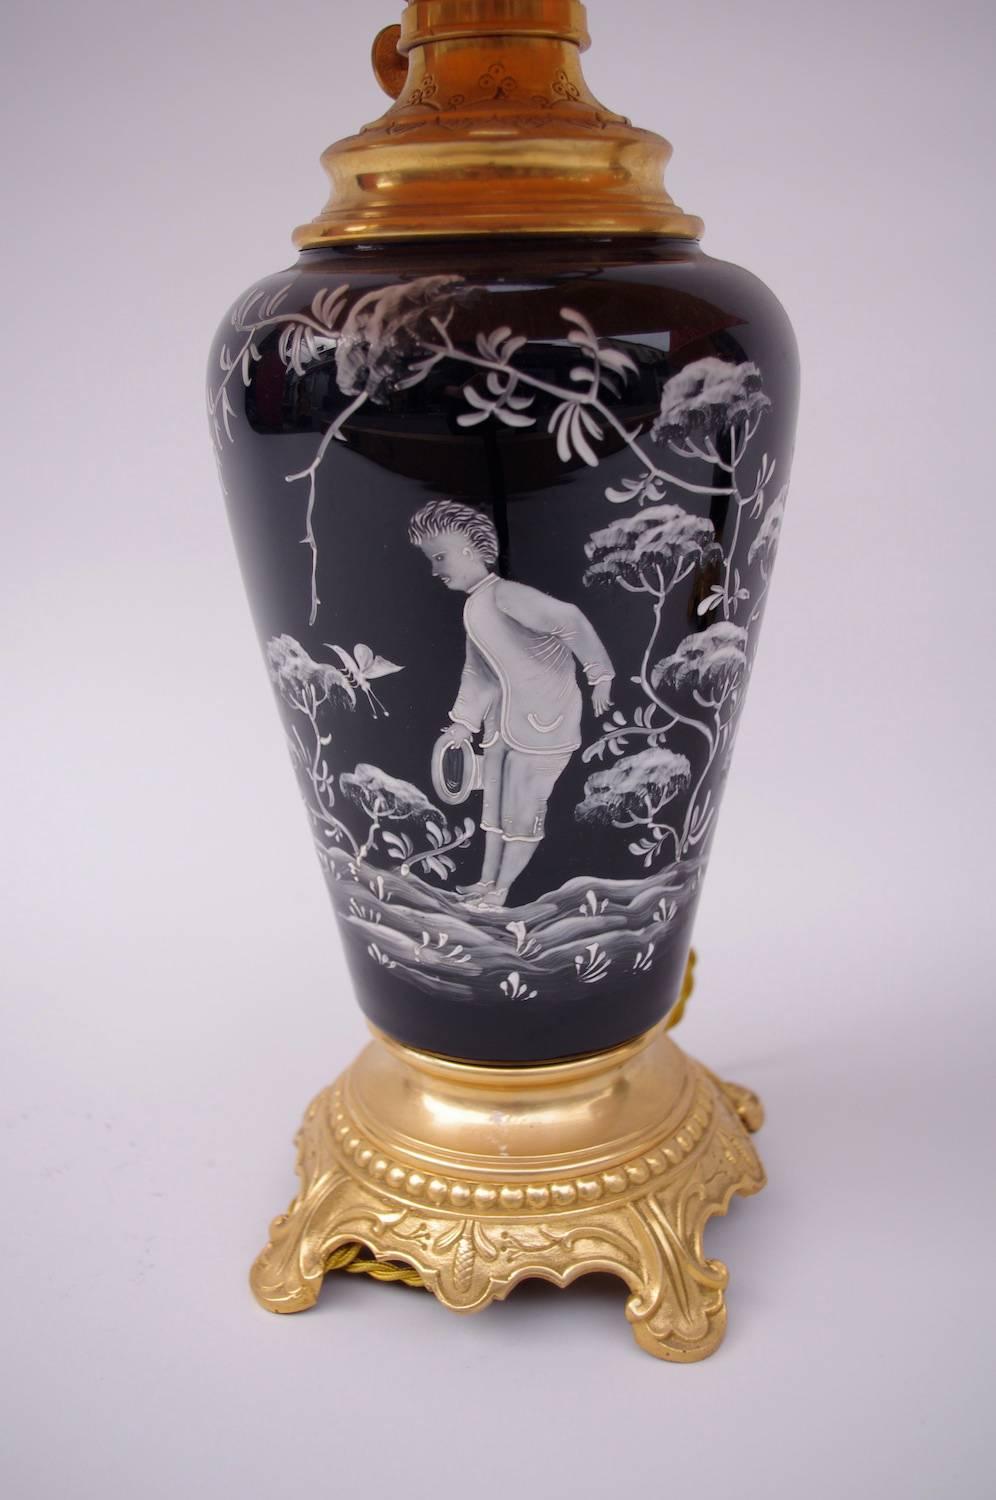 Pair of black enameled opaline lamps in vase shape. Round chiselled and gilt bronze mount with a pearls frieze, standing on four acanthus-shape legs.
White-painted enamel decoration of scenes representing a young boy walking through the vegetation